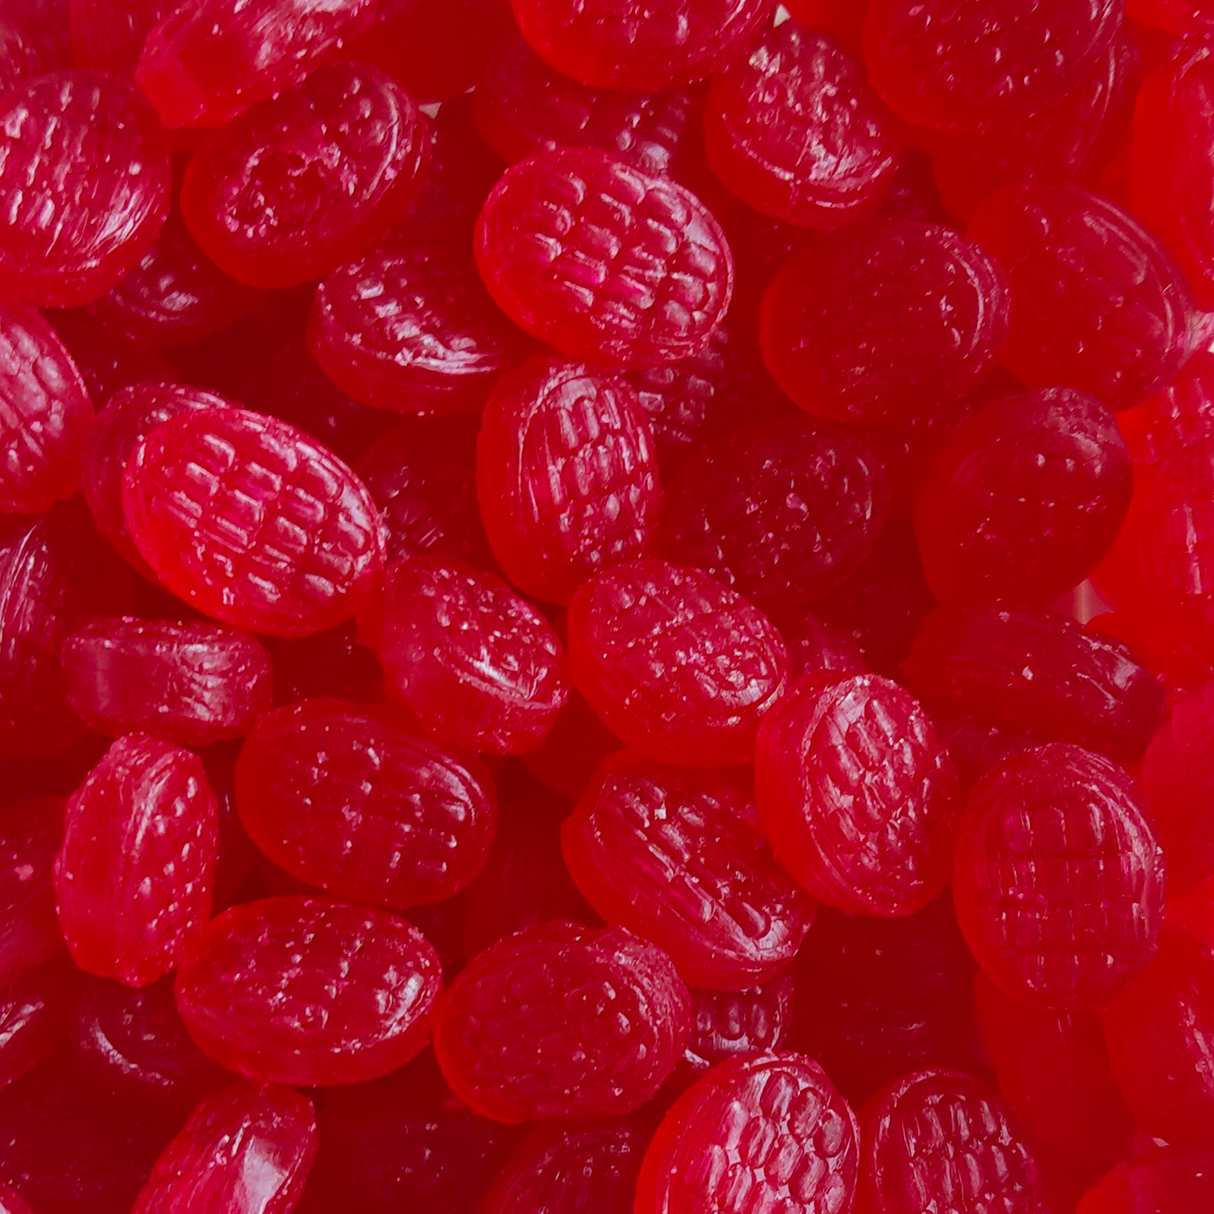 Raspberry Drops (Old Fashioned)